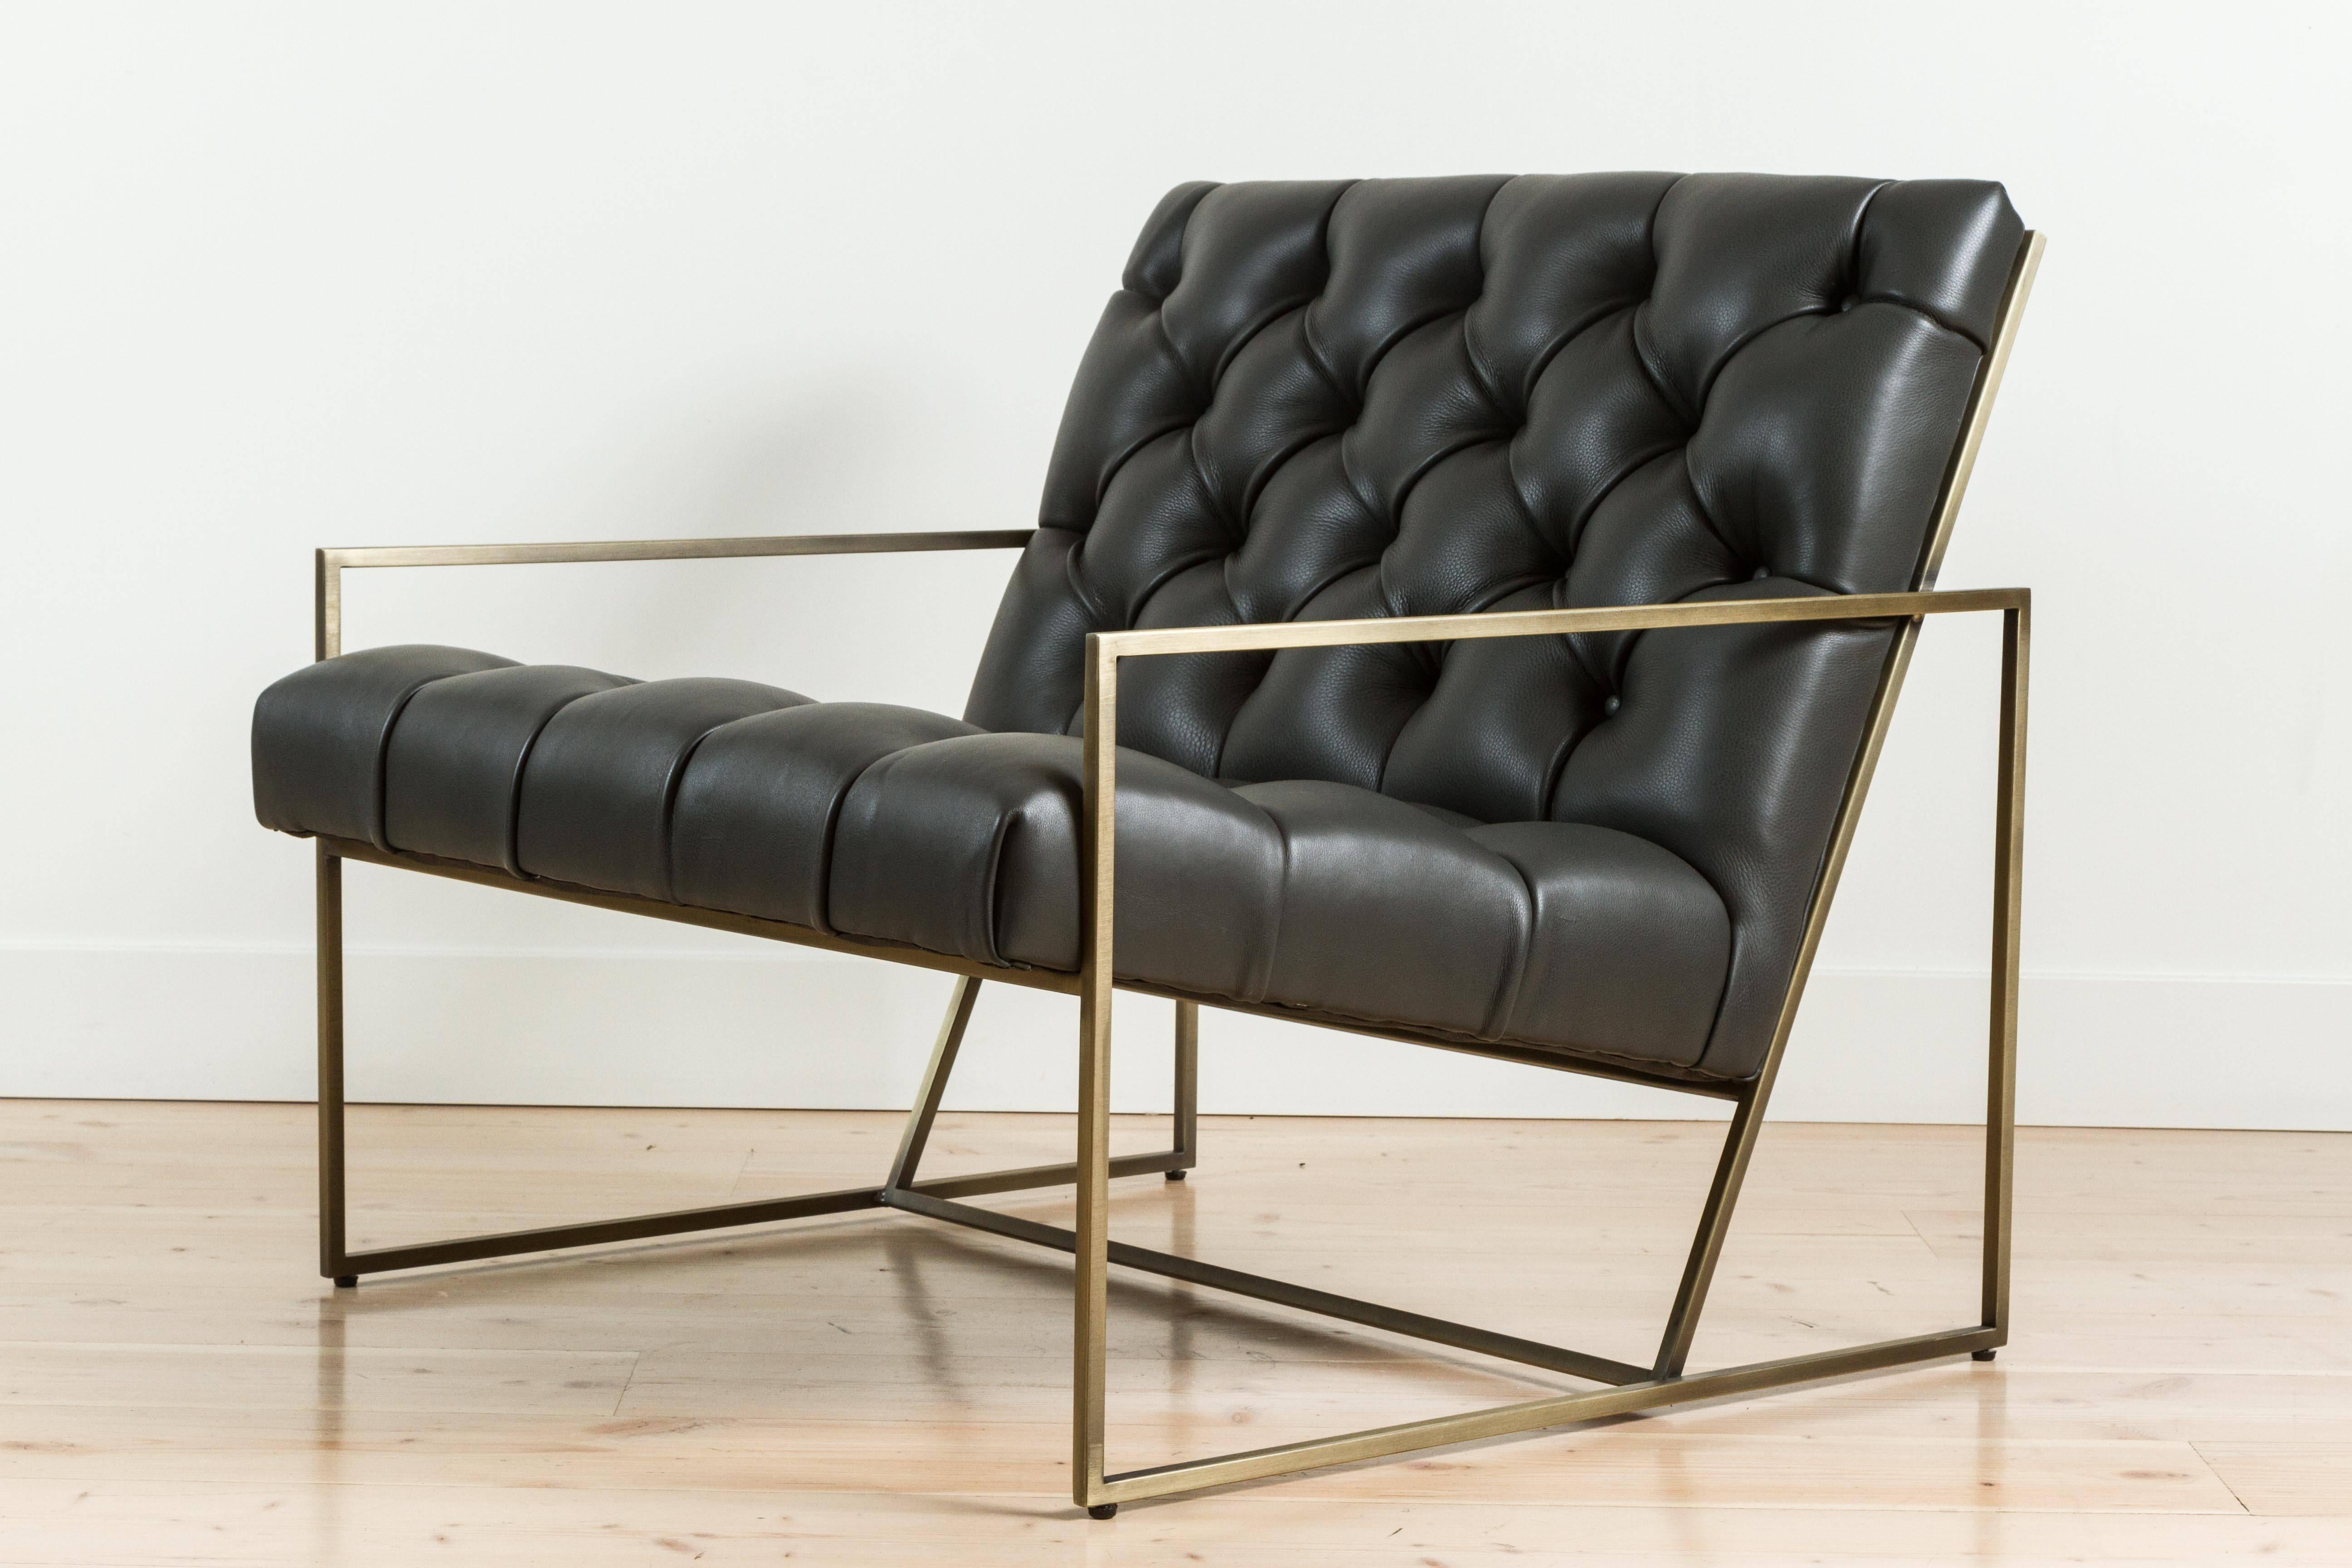 Thin frame lounge chair in diamond tufted charcoal leather by Lawson-Fenning with antiqued brass frame.

Also available to order in customer's own materials with a 8-10 week lead time. 

As show: $2,656
To order: $ 1900 + COM